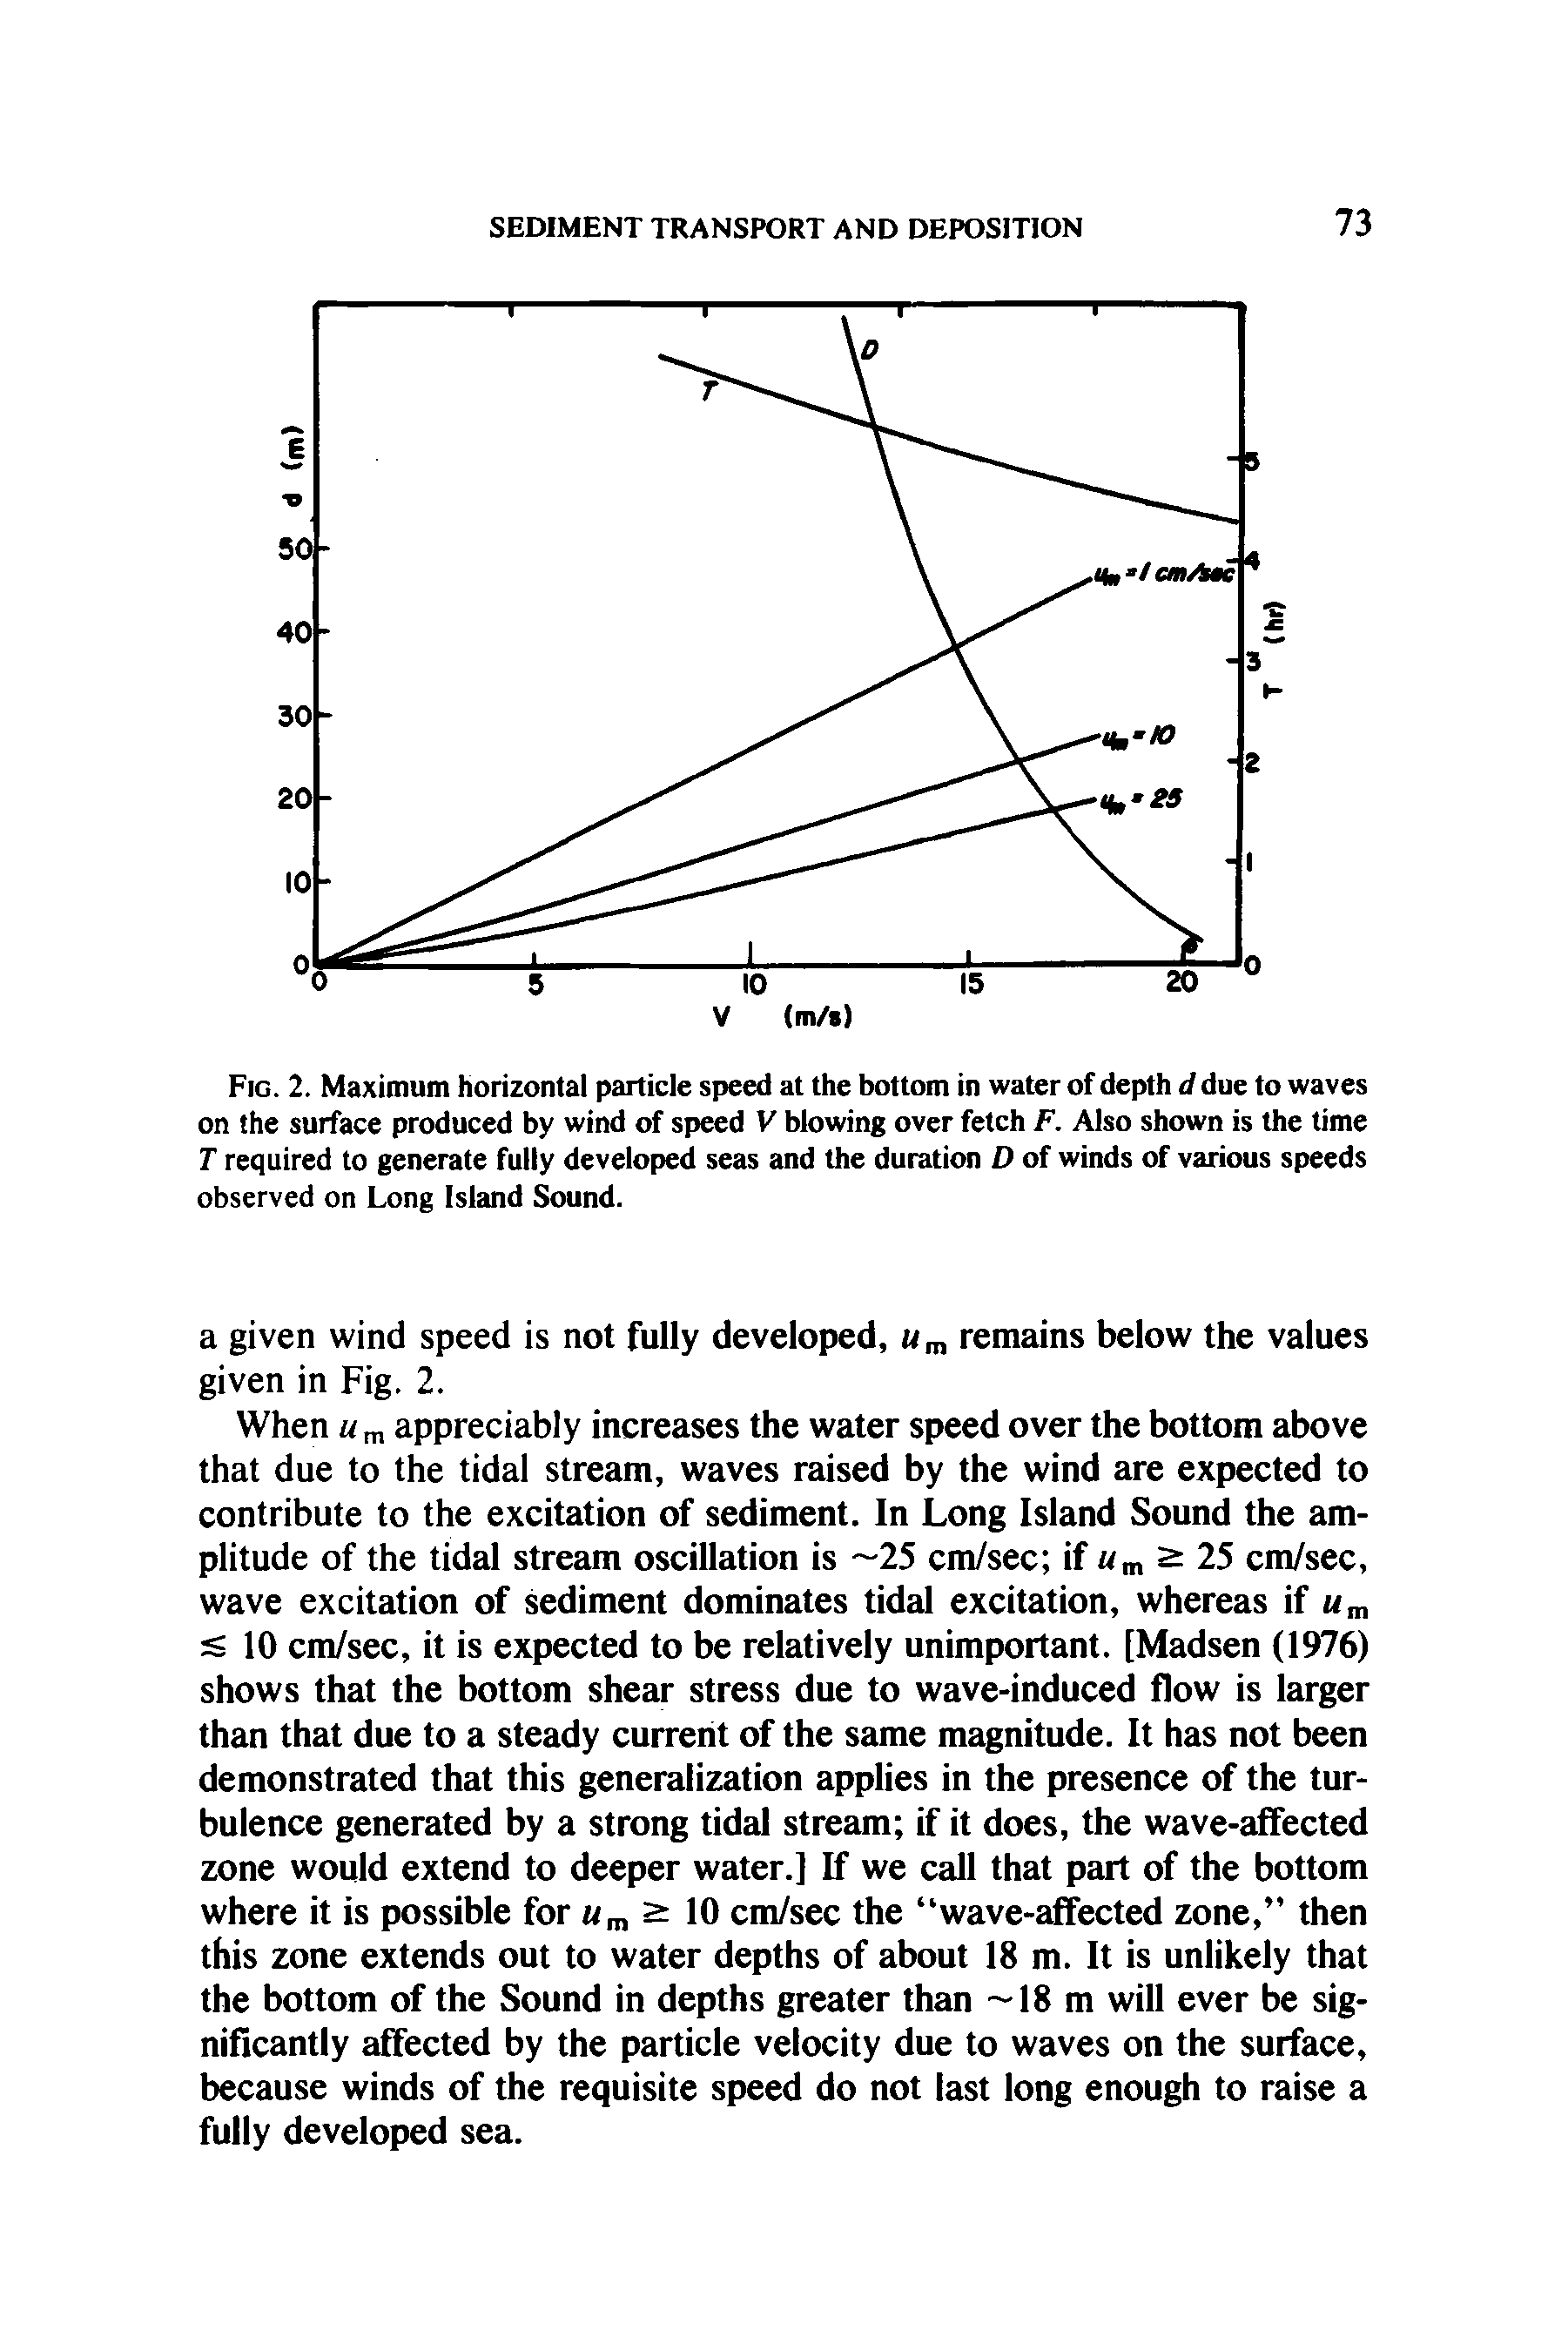 Fig. 2. Maximum horizontal particle speed at the bottom in water of depth </due to waves on the surface produced by wind of speed V blowing over fetch F. Also shown is the time T required to generate fully developed seas and the duration D of winds of various speeds observed on Long Island Sound.